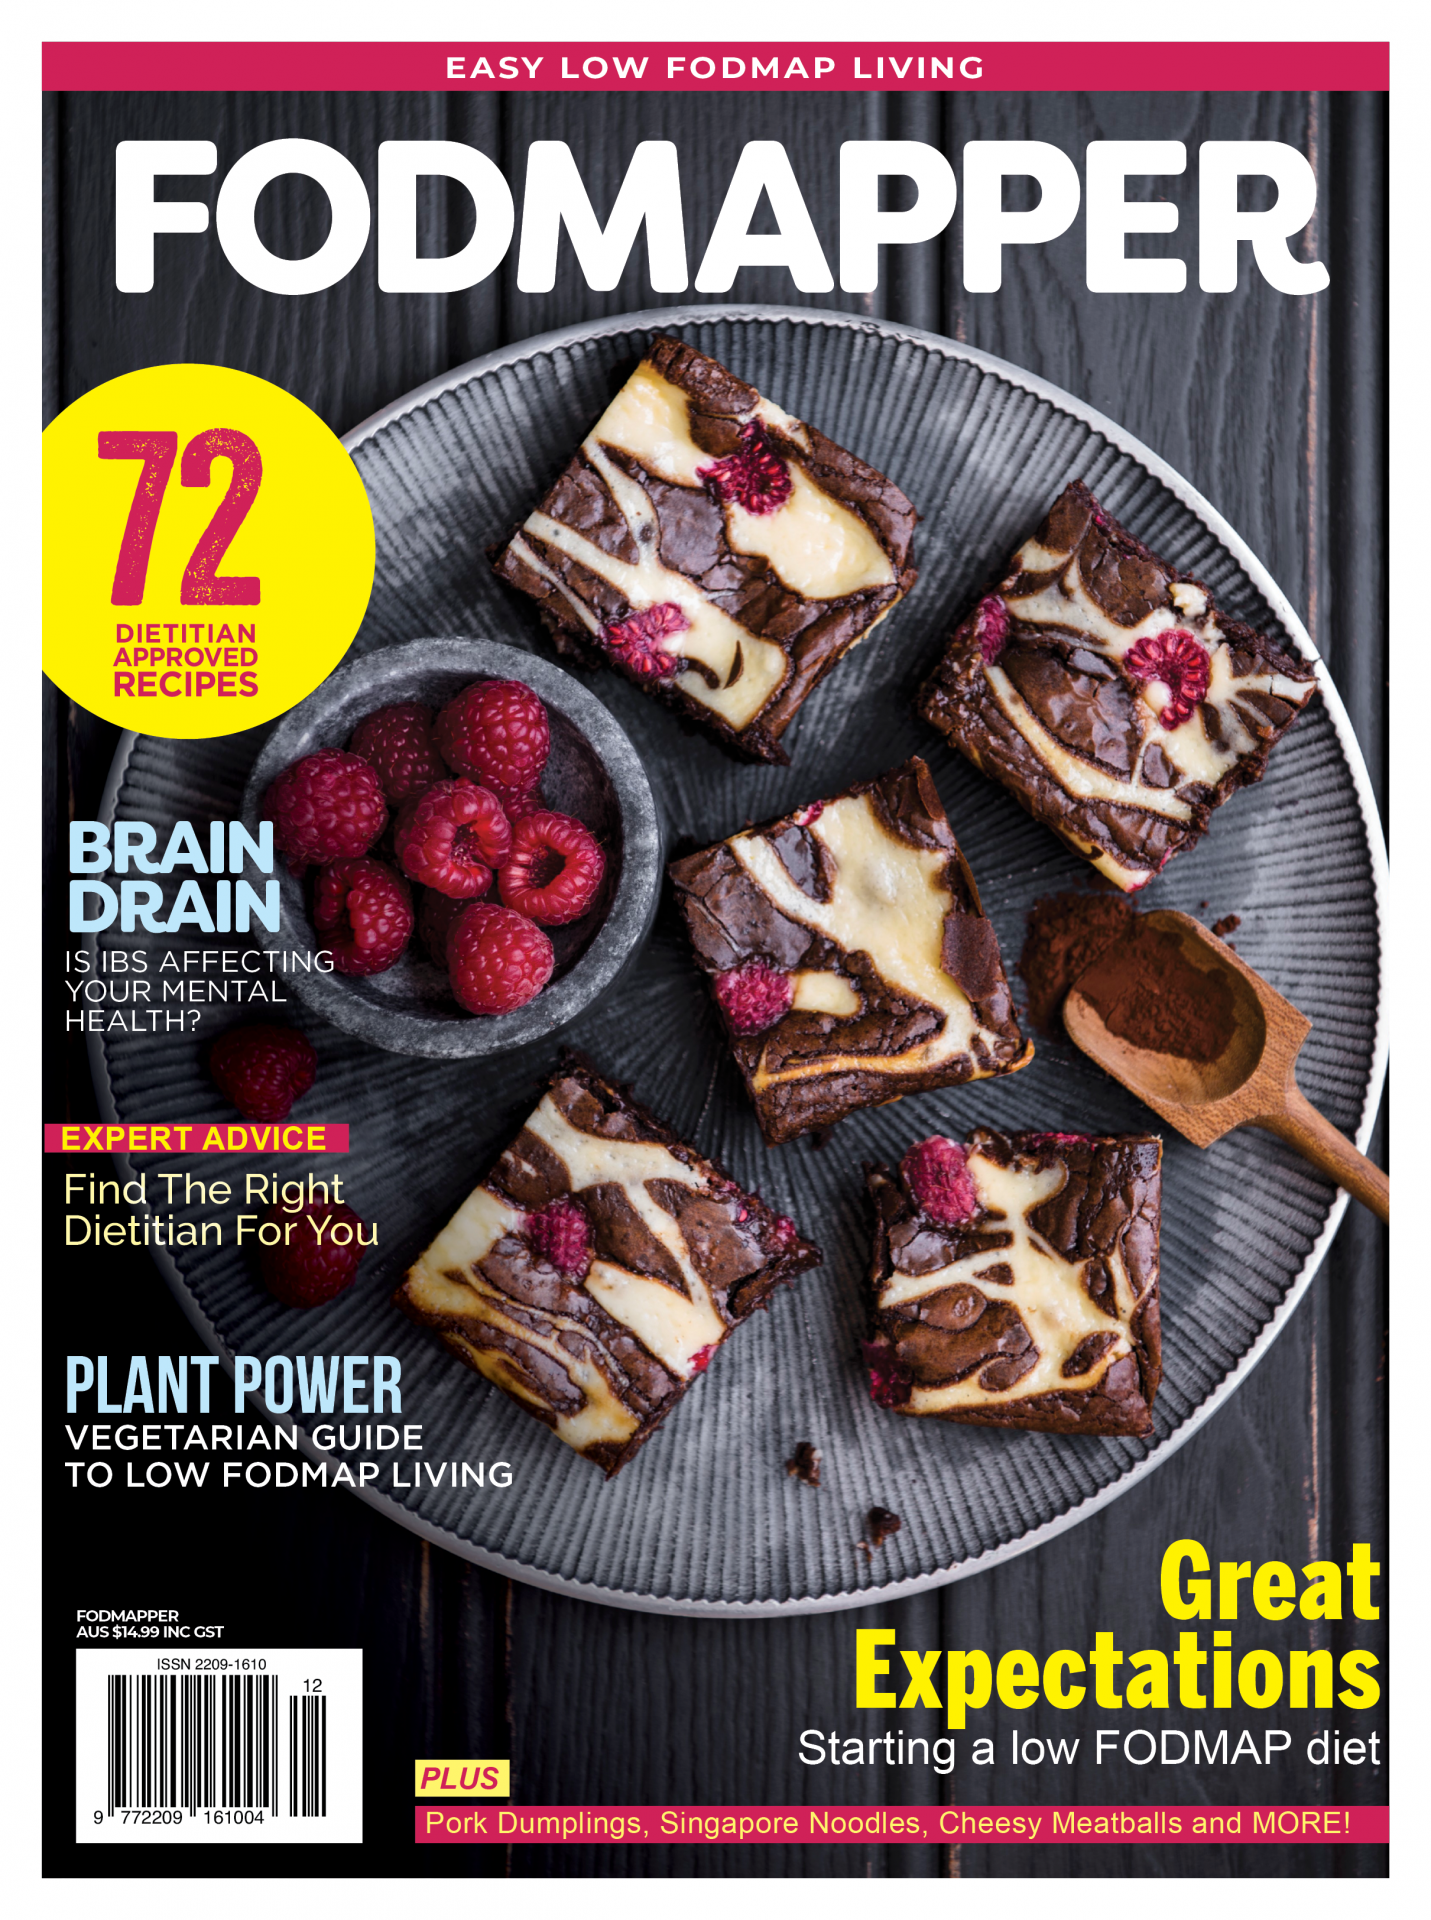 Cover of FODMAPPER magazine issue 12 featuring low FODMAP raspberry cheesecake brownies sliced on a plate.